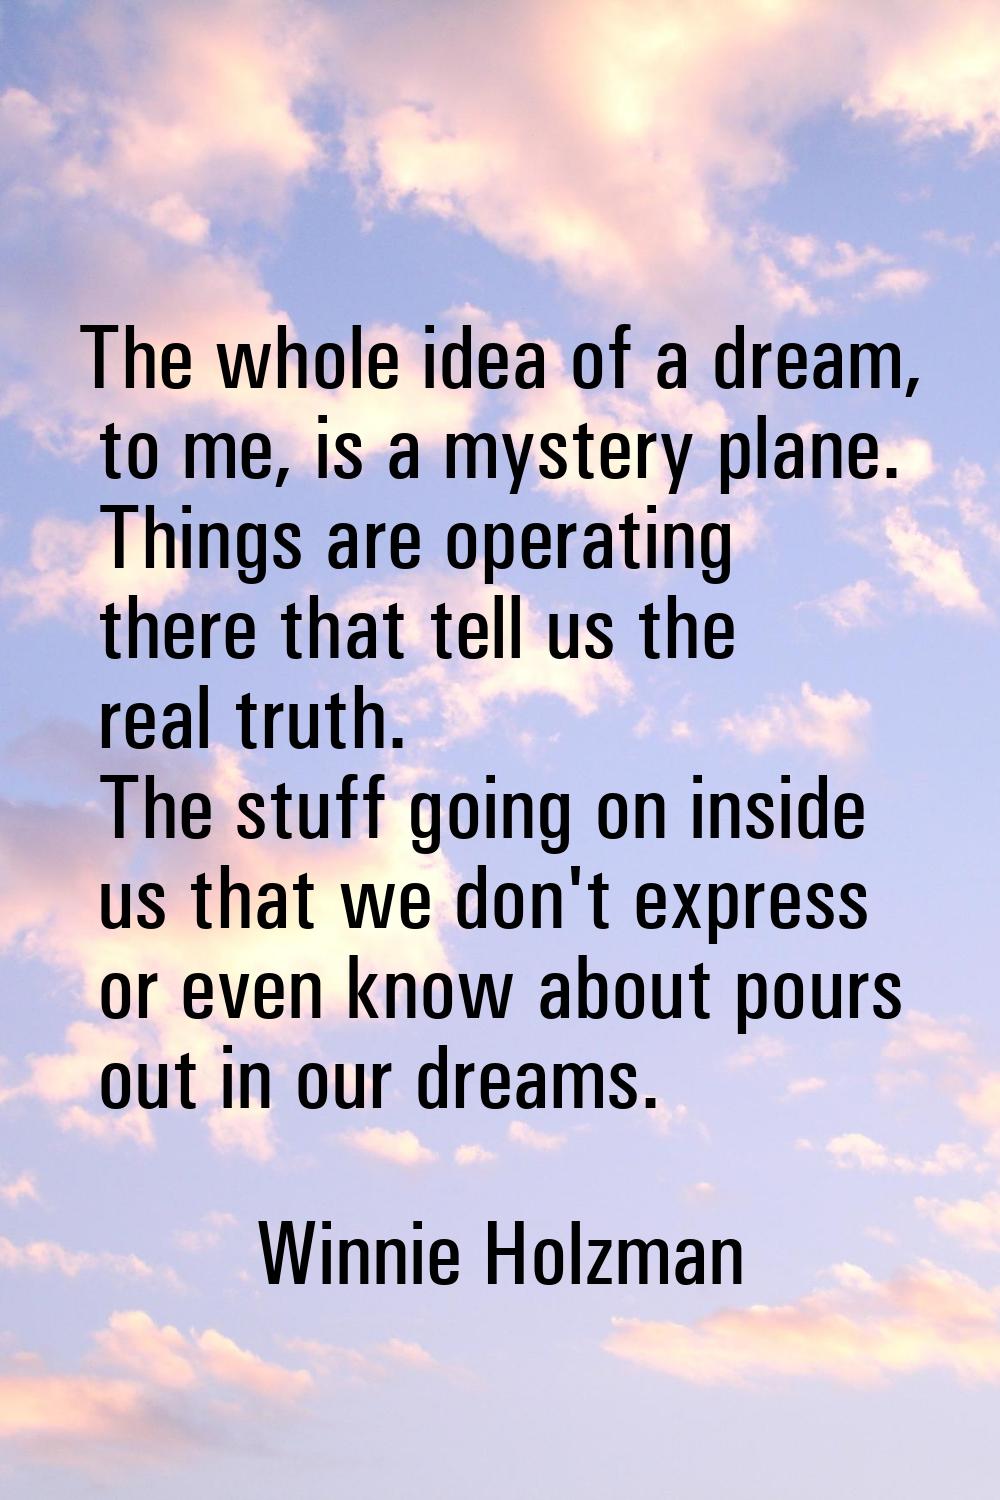 The whole idea of a dream, to me, is a mystery plane. Things are operating there that tell us the r